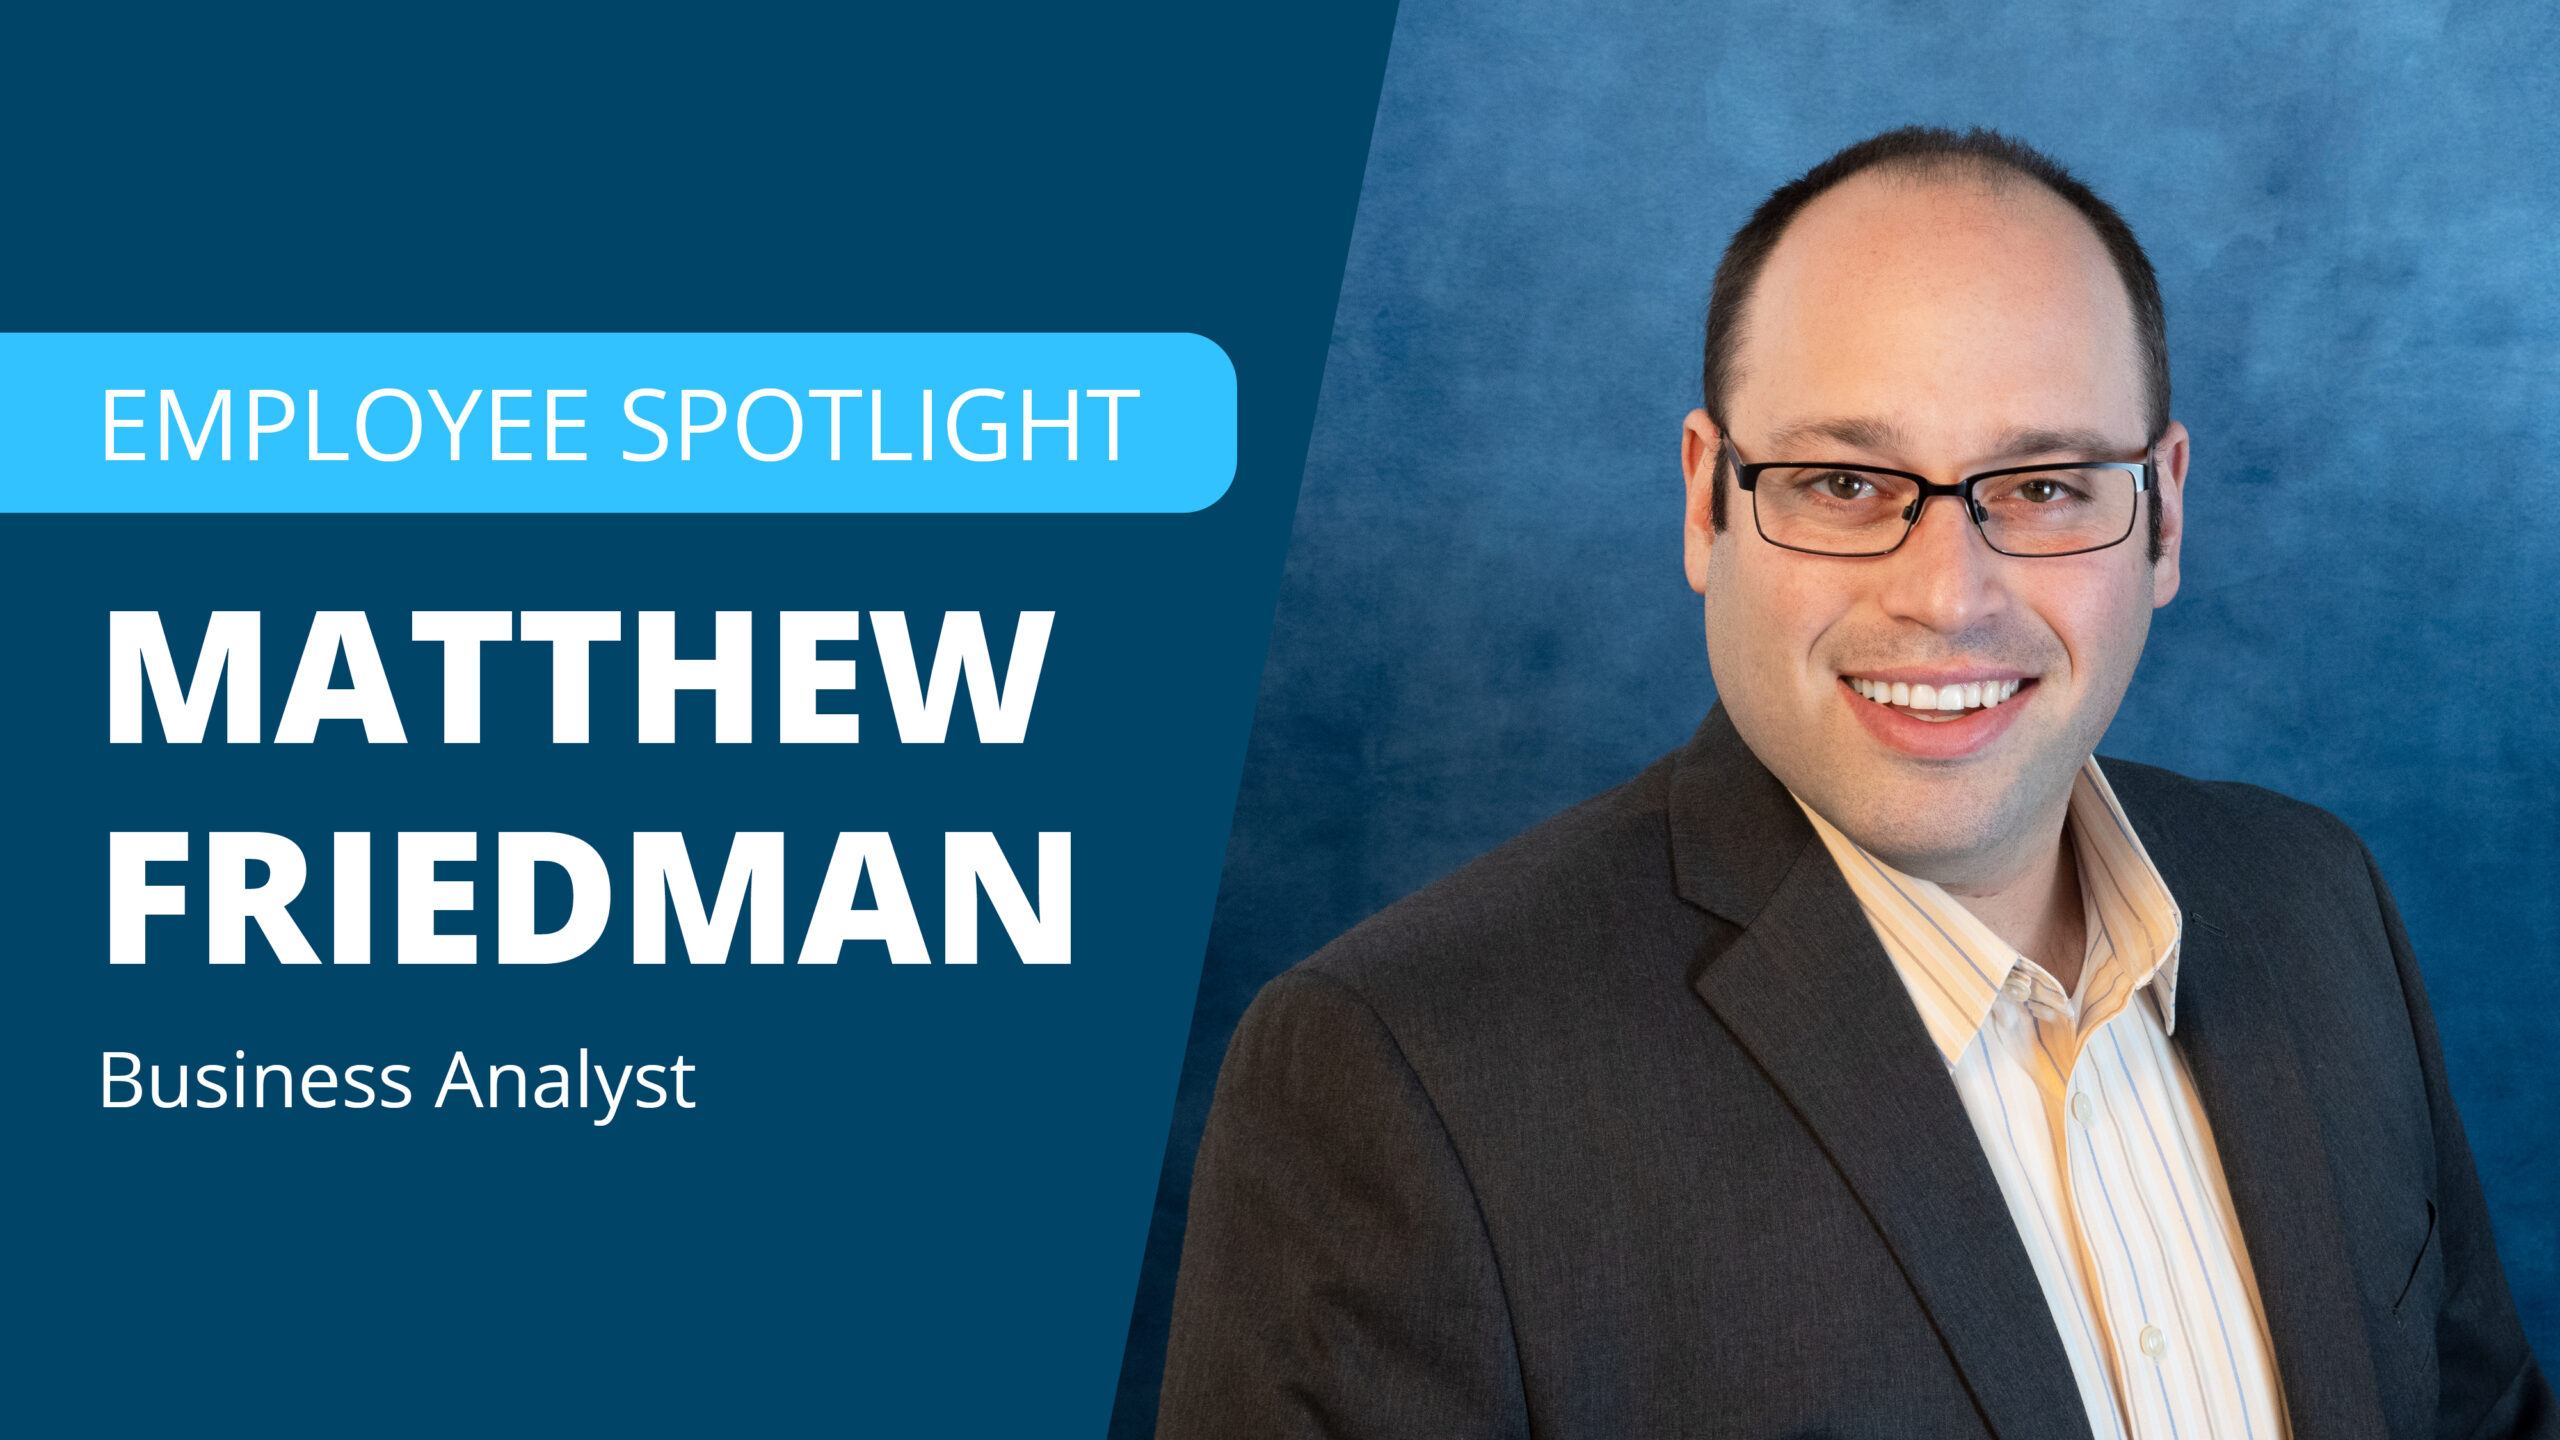 Find Business Analyst Matthew Friedman in his favorite place – on top of a mountain